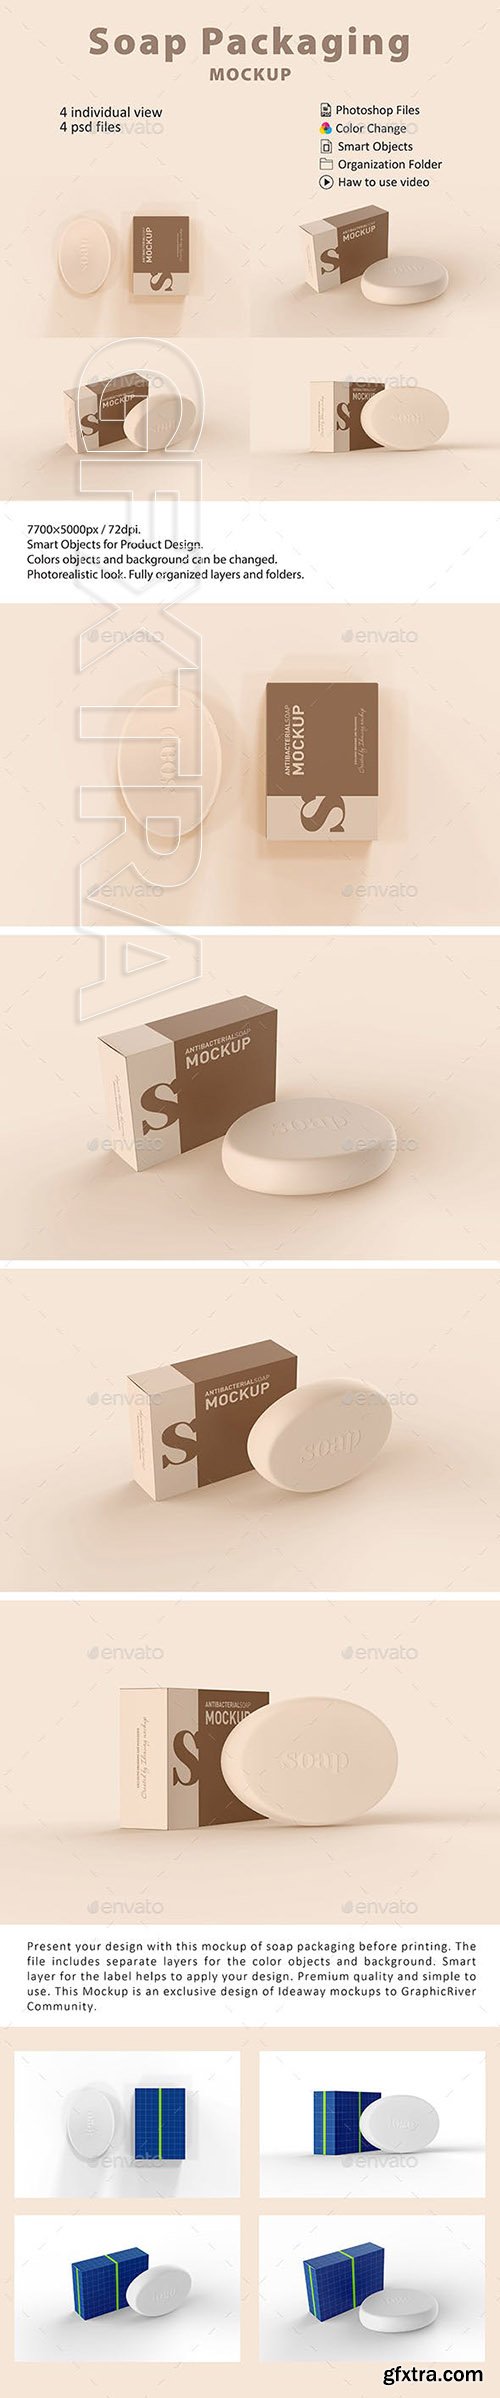 GraphicRiver - Soap Packaging Mockup 23804136